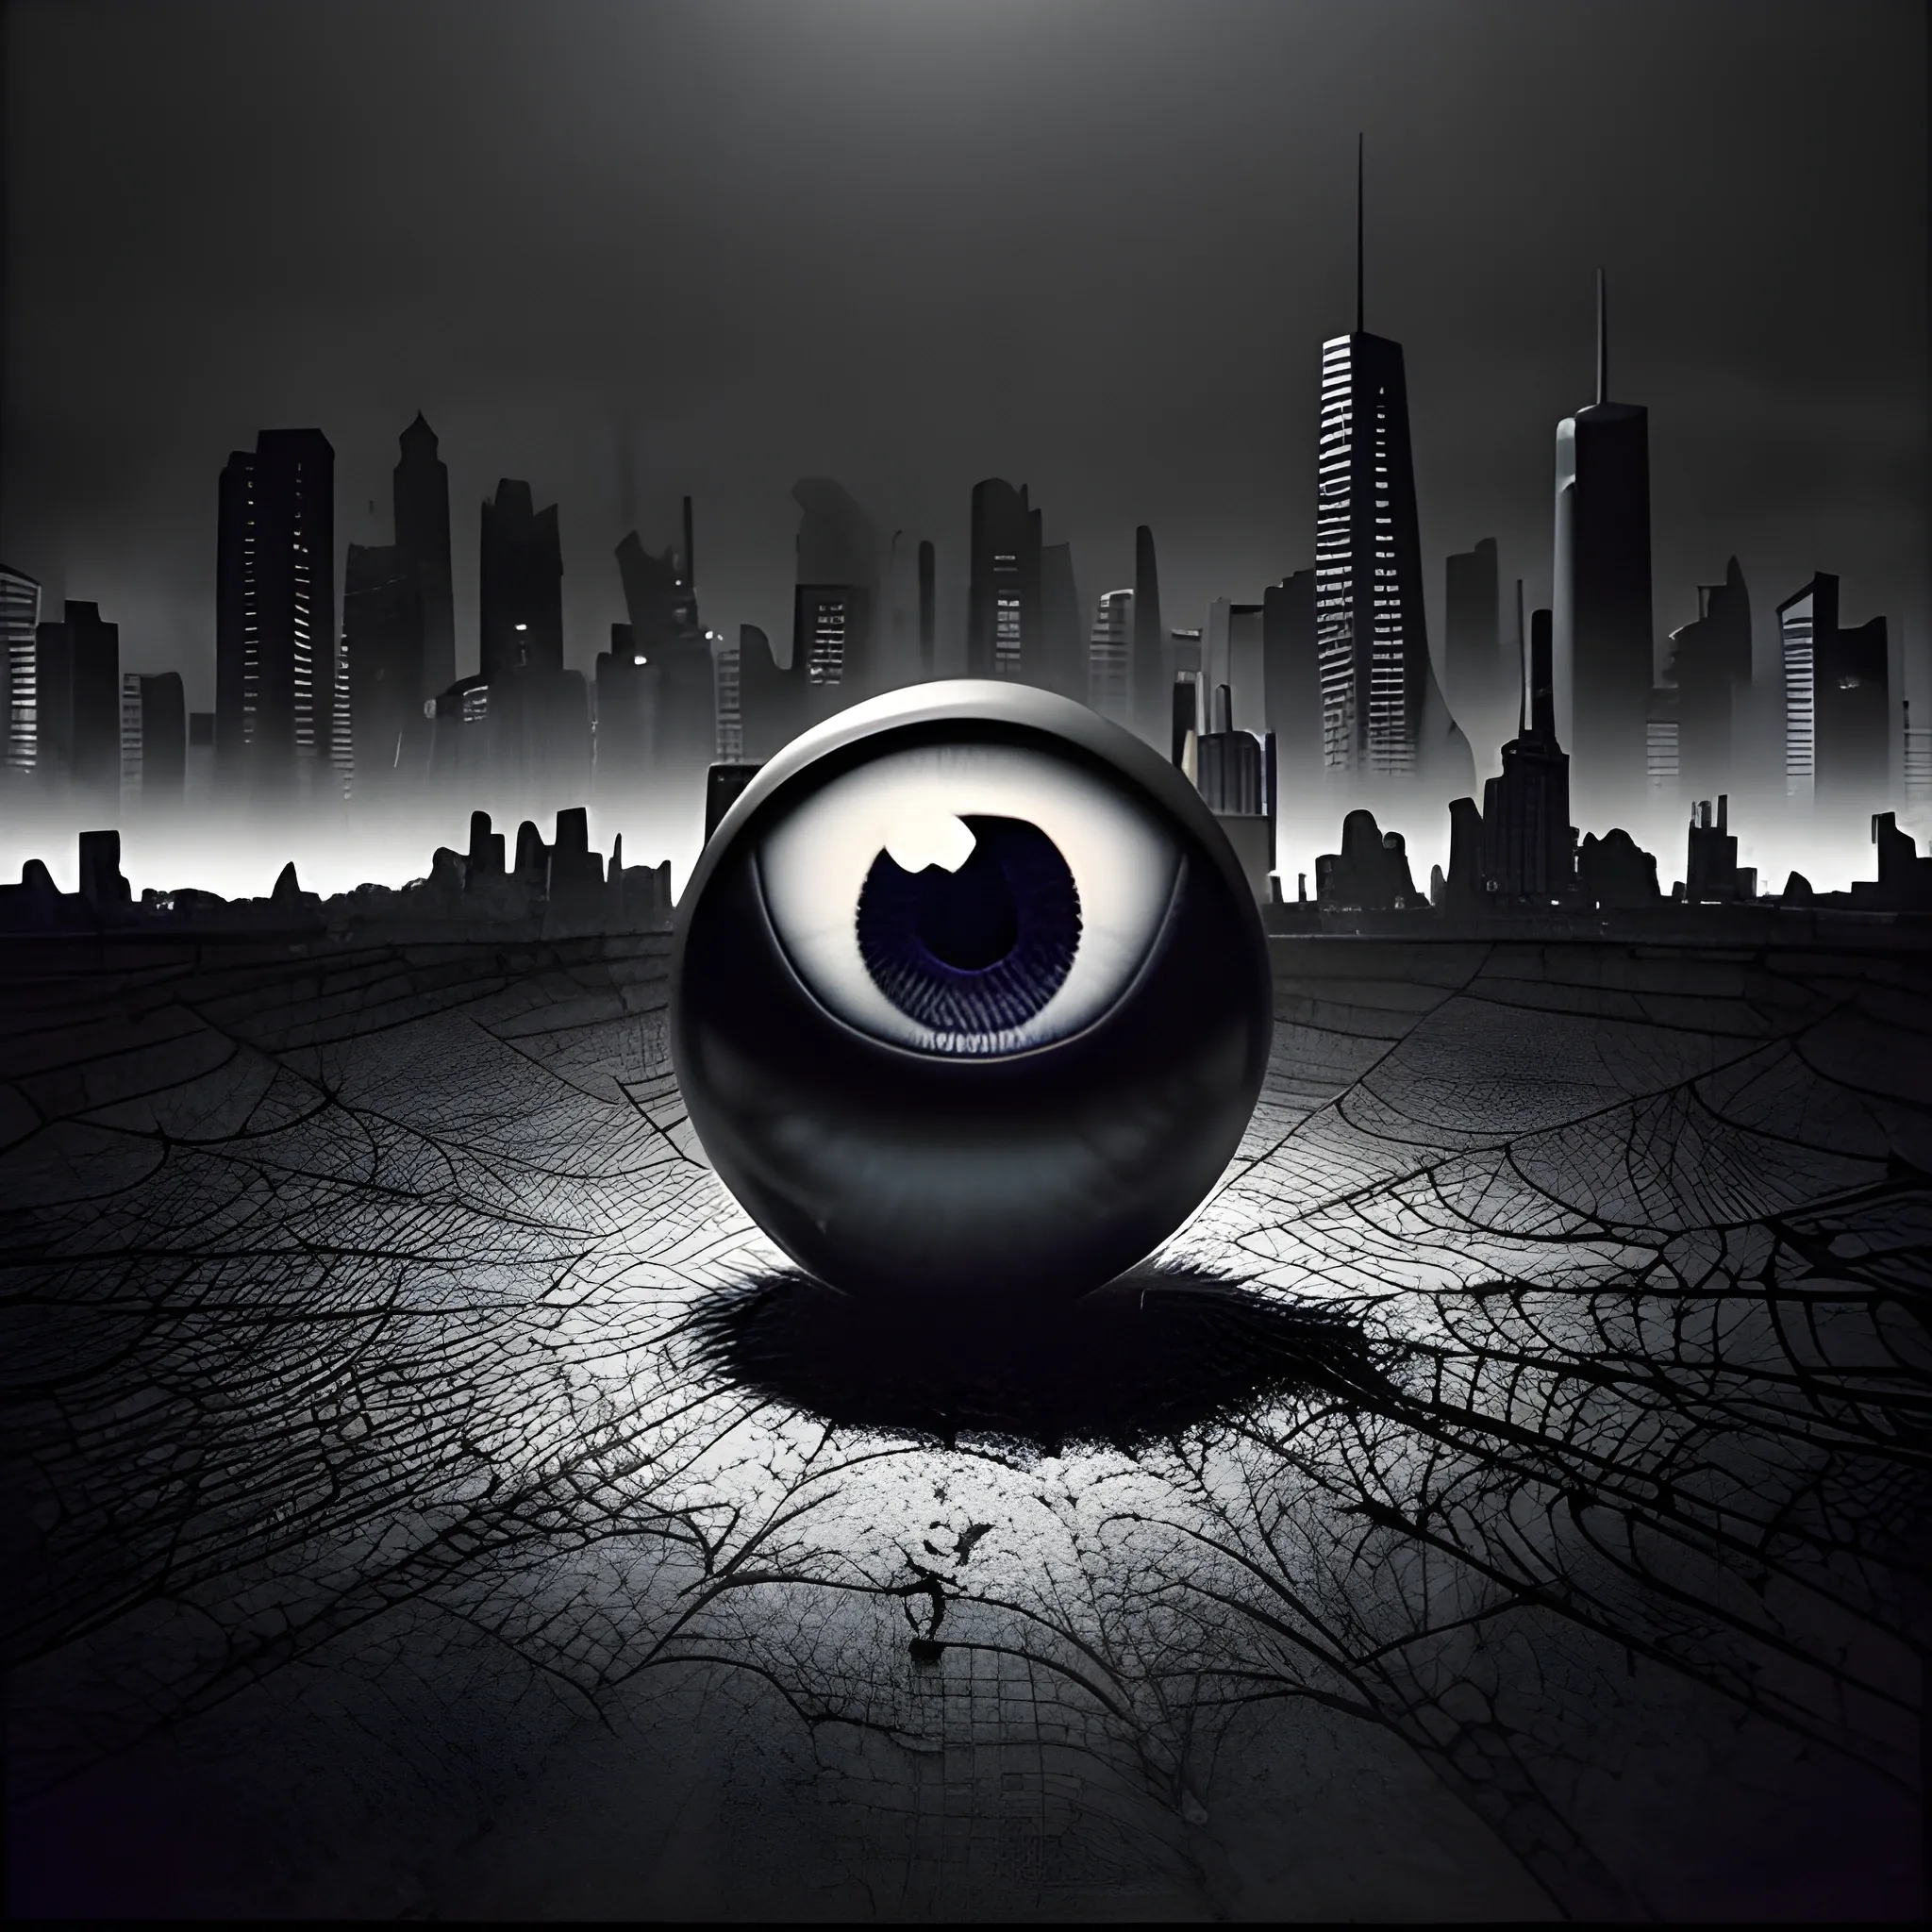 "rfktrstyle, An exquisite and high-resolution macro photograph capturing the surreal scene of a spider delicately traversing a sinister and enigmatic eyeball. Set against the backdrop of a dystopian cityscape, the lighting imparts a moody and mysterious ambiance. The image is framed with precision using Kodak Ultra Max film, employing an 85mm lens for meticulous detail.

Captured using a combination of an iPhone 7 and DSLR technology, the photograph boasts impeccable quality, presenting a photorealistic and raw portrayal of this dark surrealist concept. Rendered in stunning 4K resolution, it immerses the viewer in a visual narrative that teeters on the edge of the bizarre and the uncanny. The spider's journey across the eerie eyeball becomes a captivating exploration of the surreal within an urban dystopia."